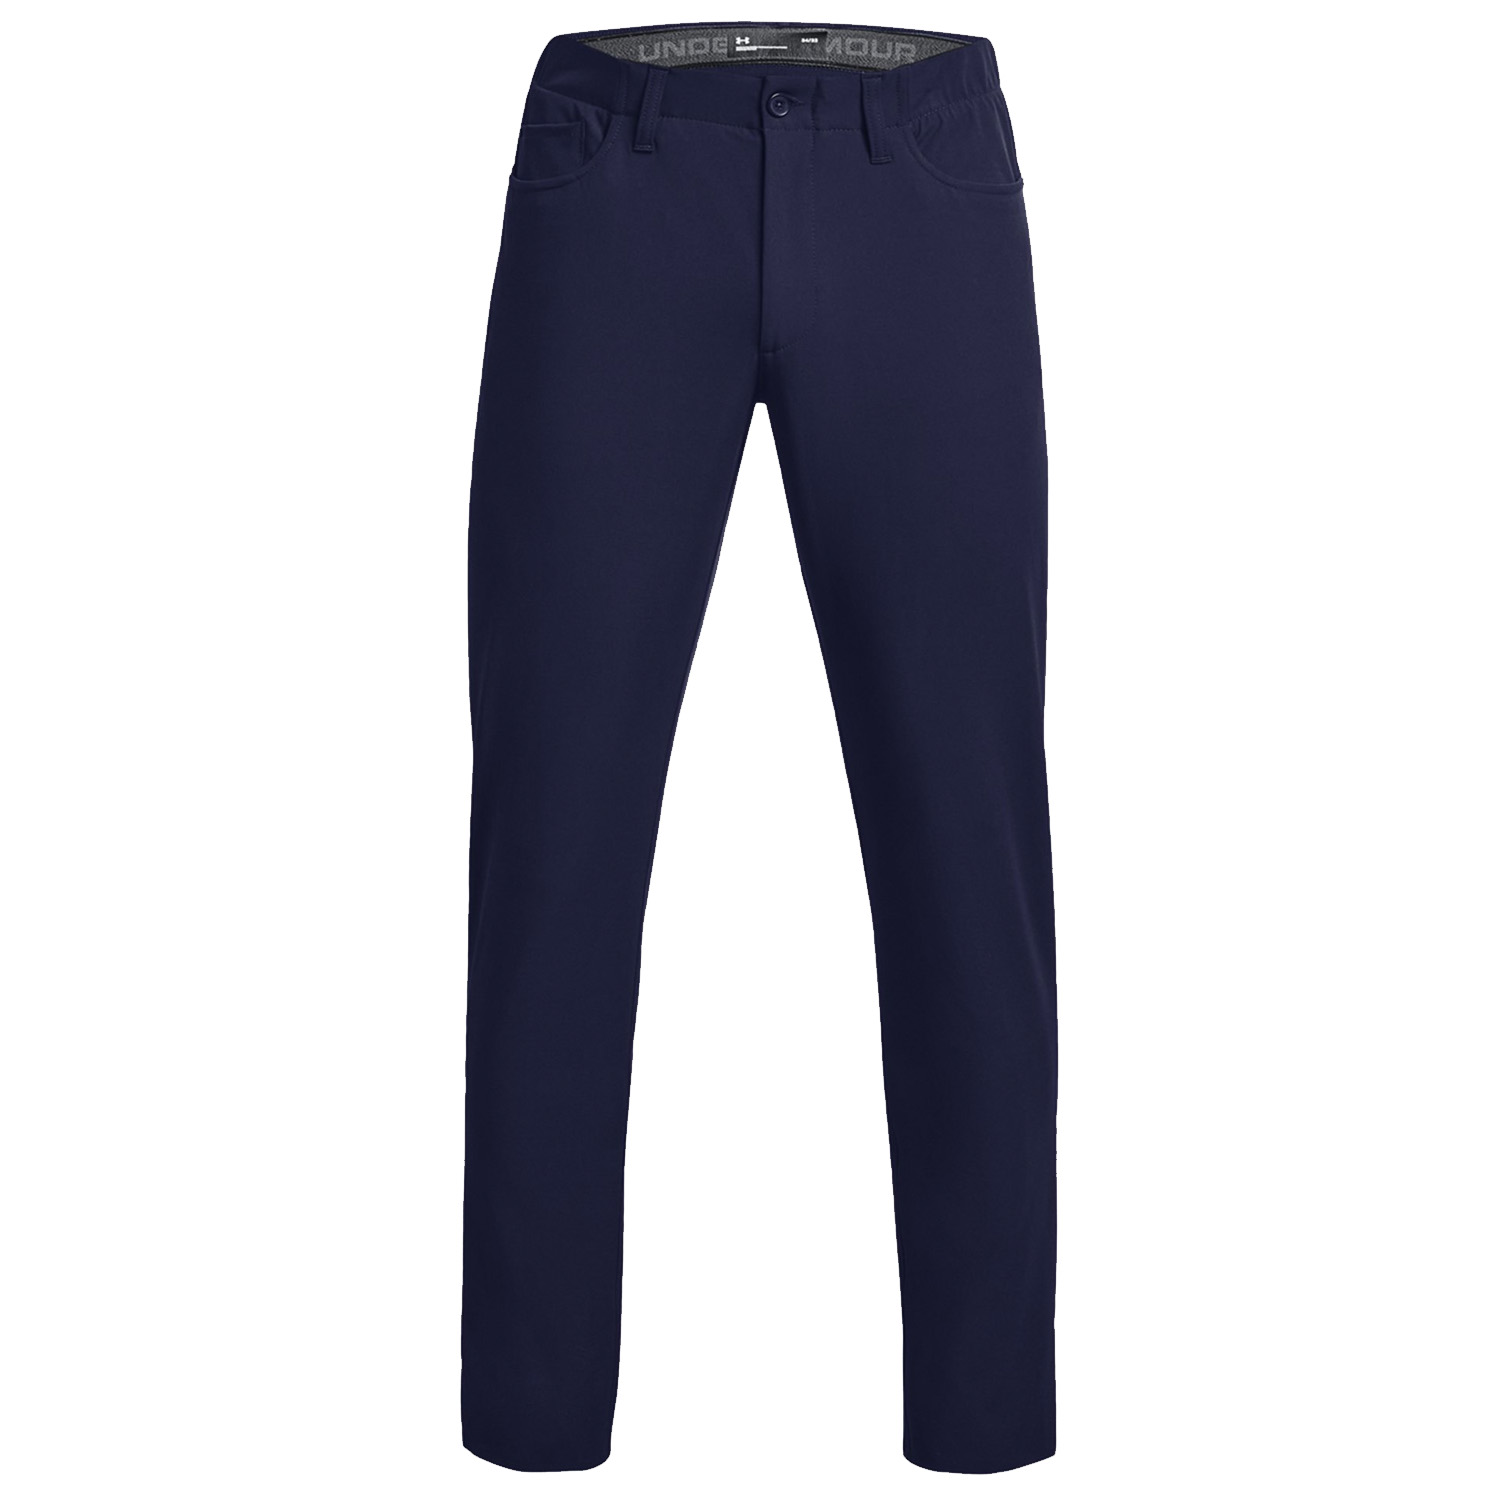 Under Armour Mens UA Drive 5 Pocket Pants Golf Trousers  - Midnight Navy